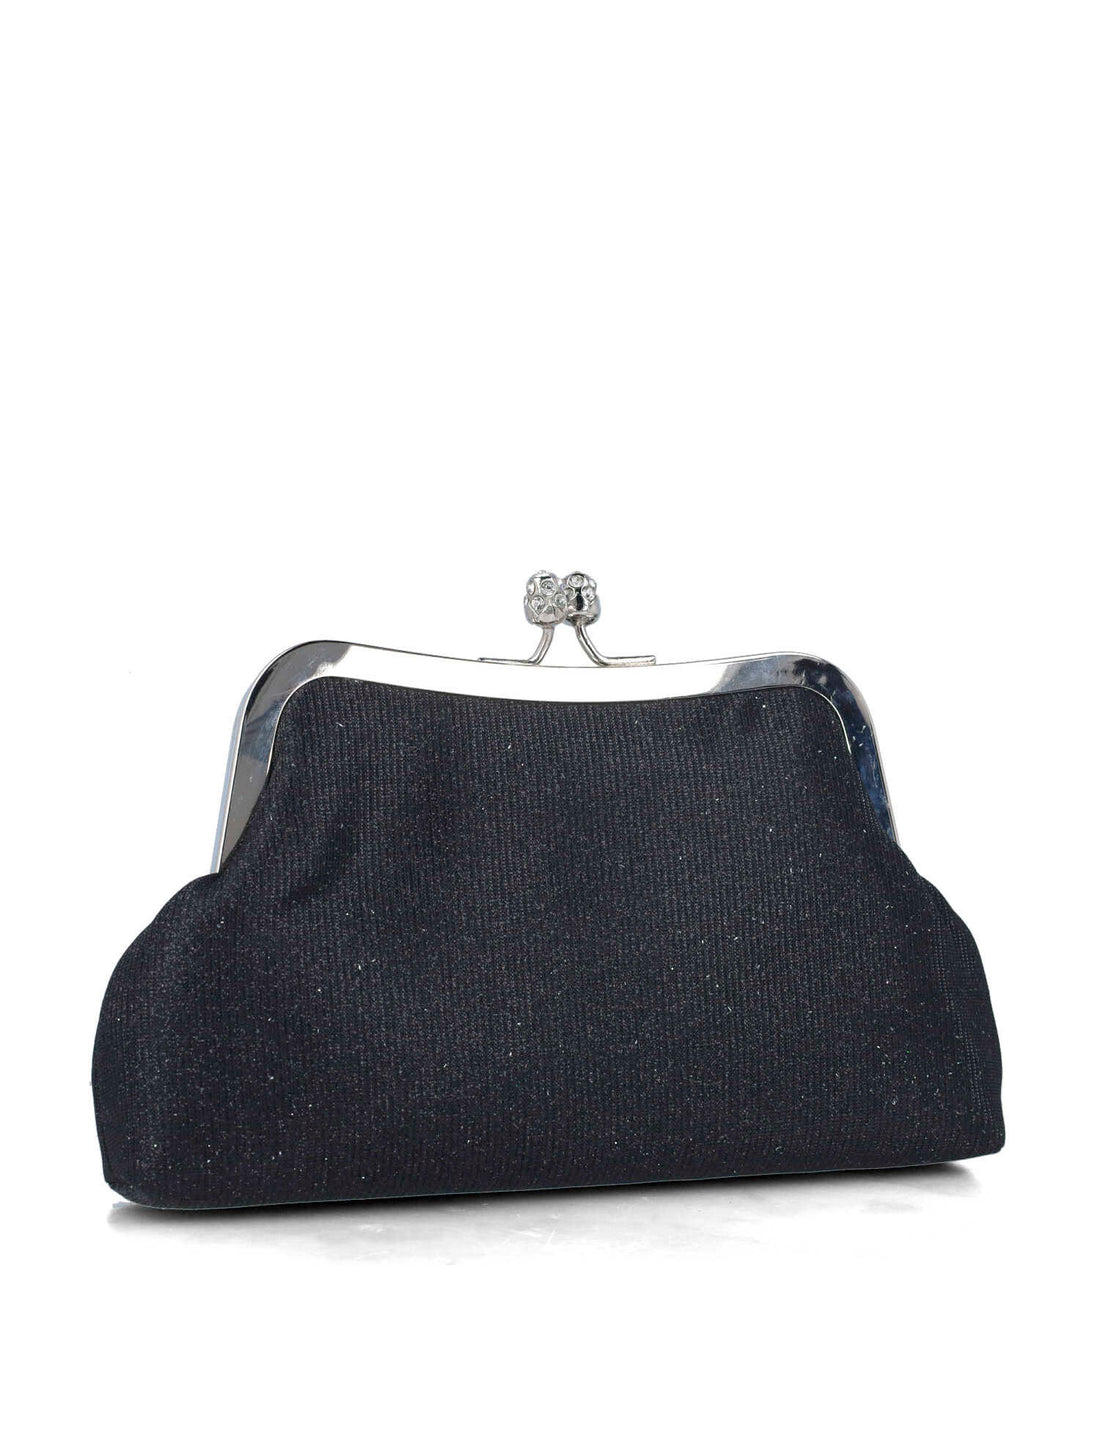 Pouch Style Clutch_85630_01_02